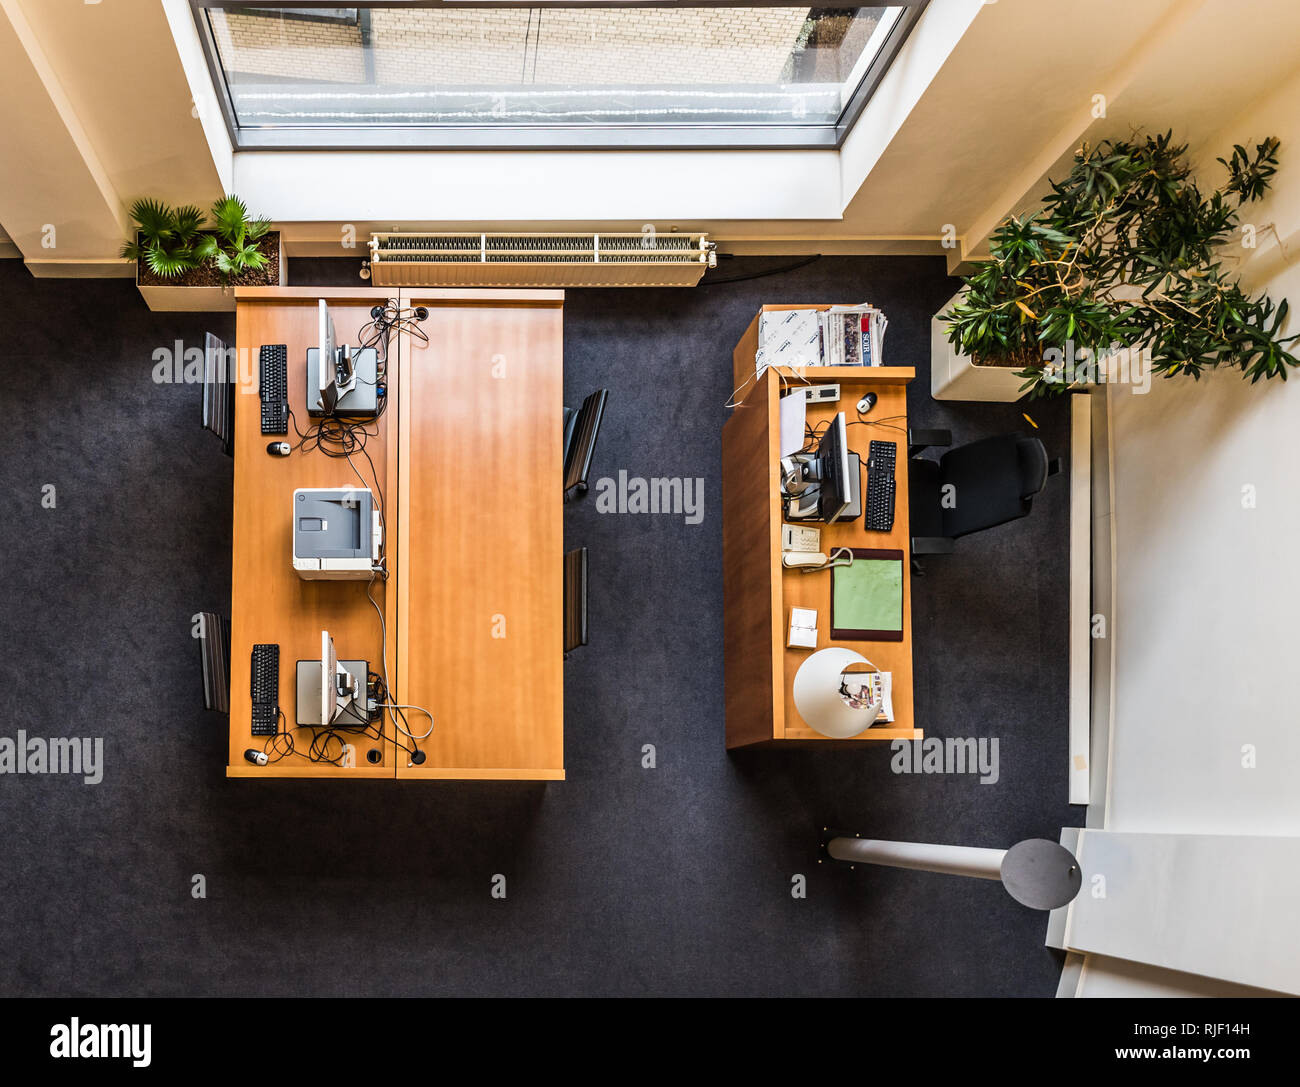 Brussels, Belgium - 02 02 2019: View from above of a wooden desk, PC, keyboard, printer and office decorations in the Brussels Parliament Stock Photo